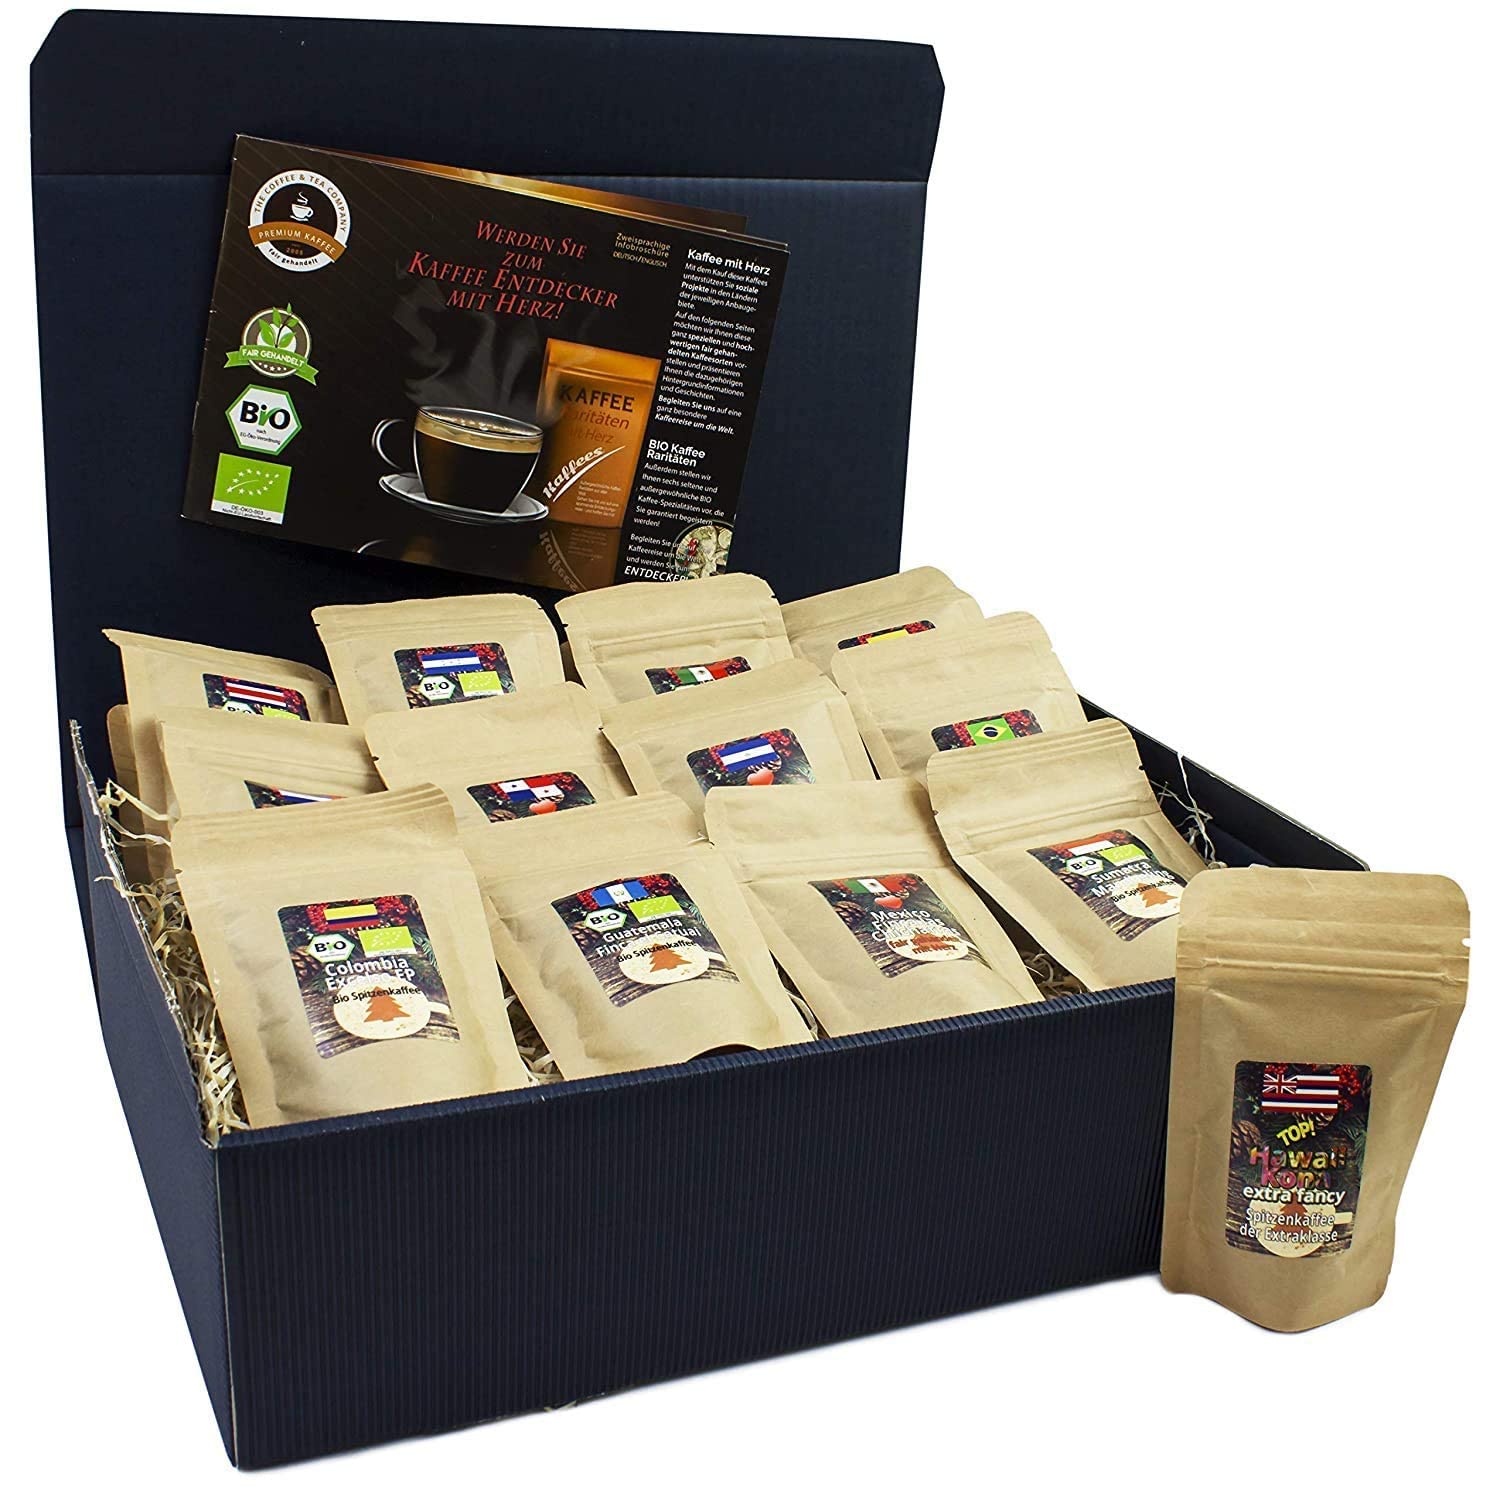 C&T Bio Fair Trade Coffee Gift Set | 13 varieties of 20g entire beans Biological & fair trade coffee rarities from all over the world + surprise | Gift for men and women